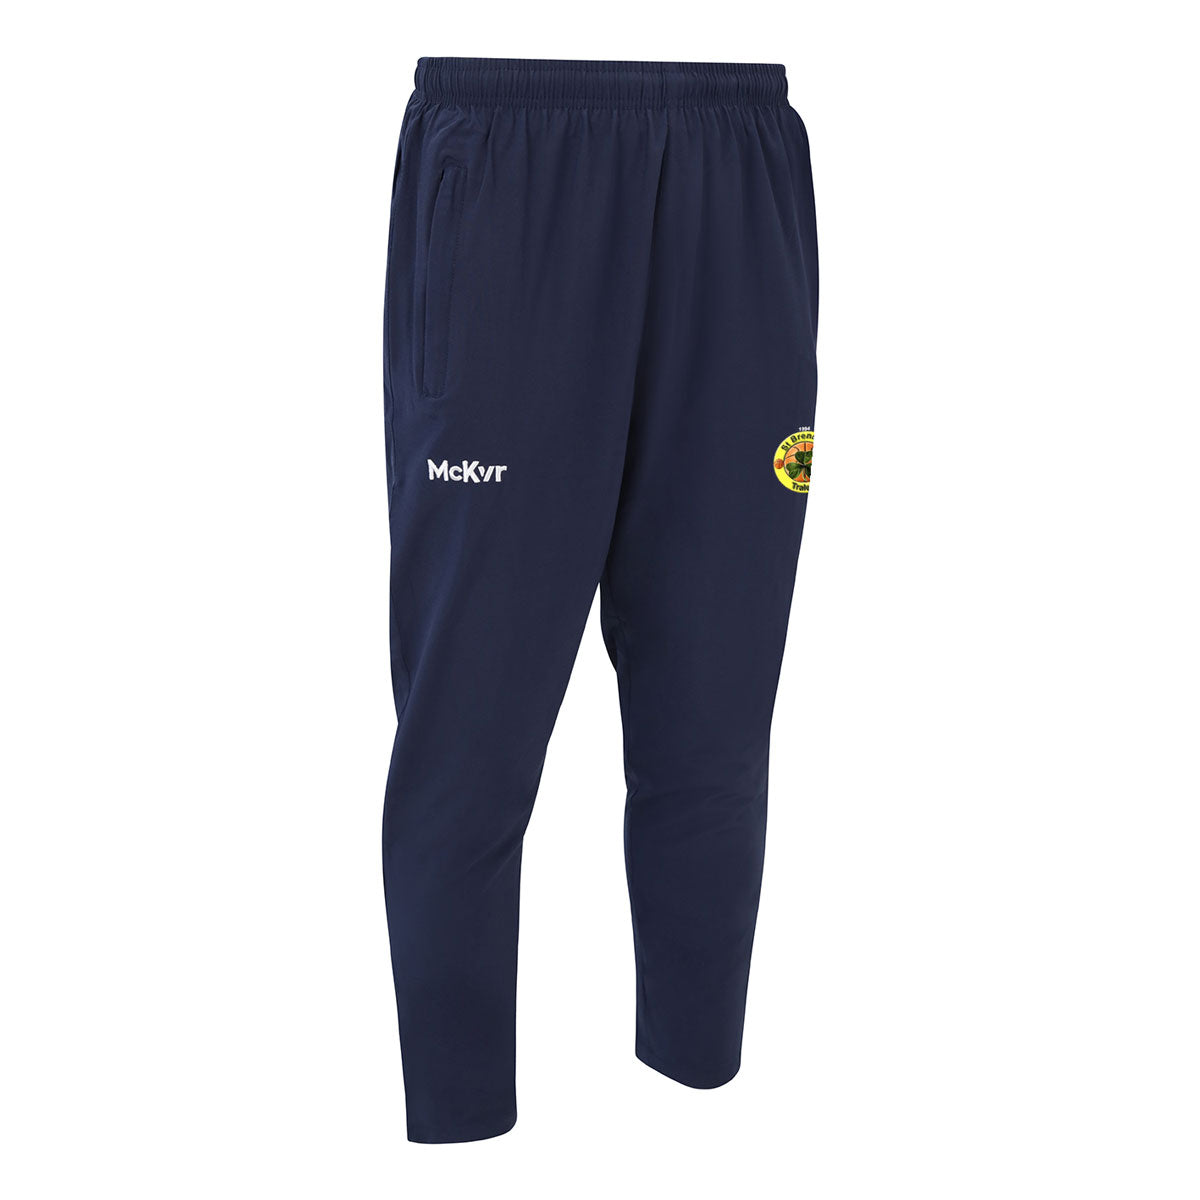 Mc Keever St Brendans Basketball Core 22 Tapered Pants - Youth - Navy